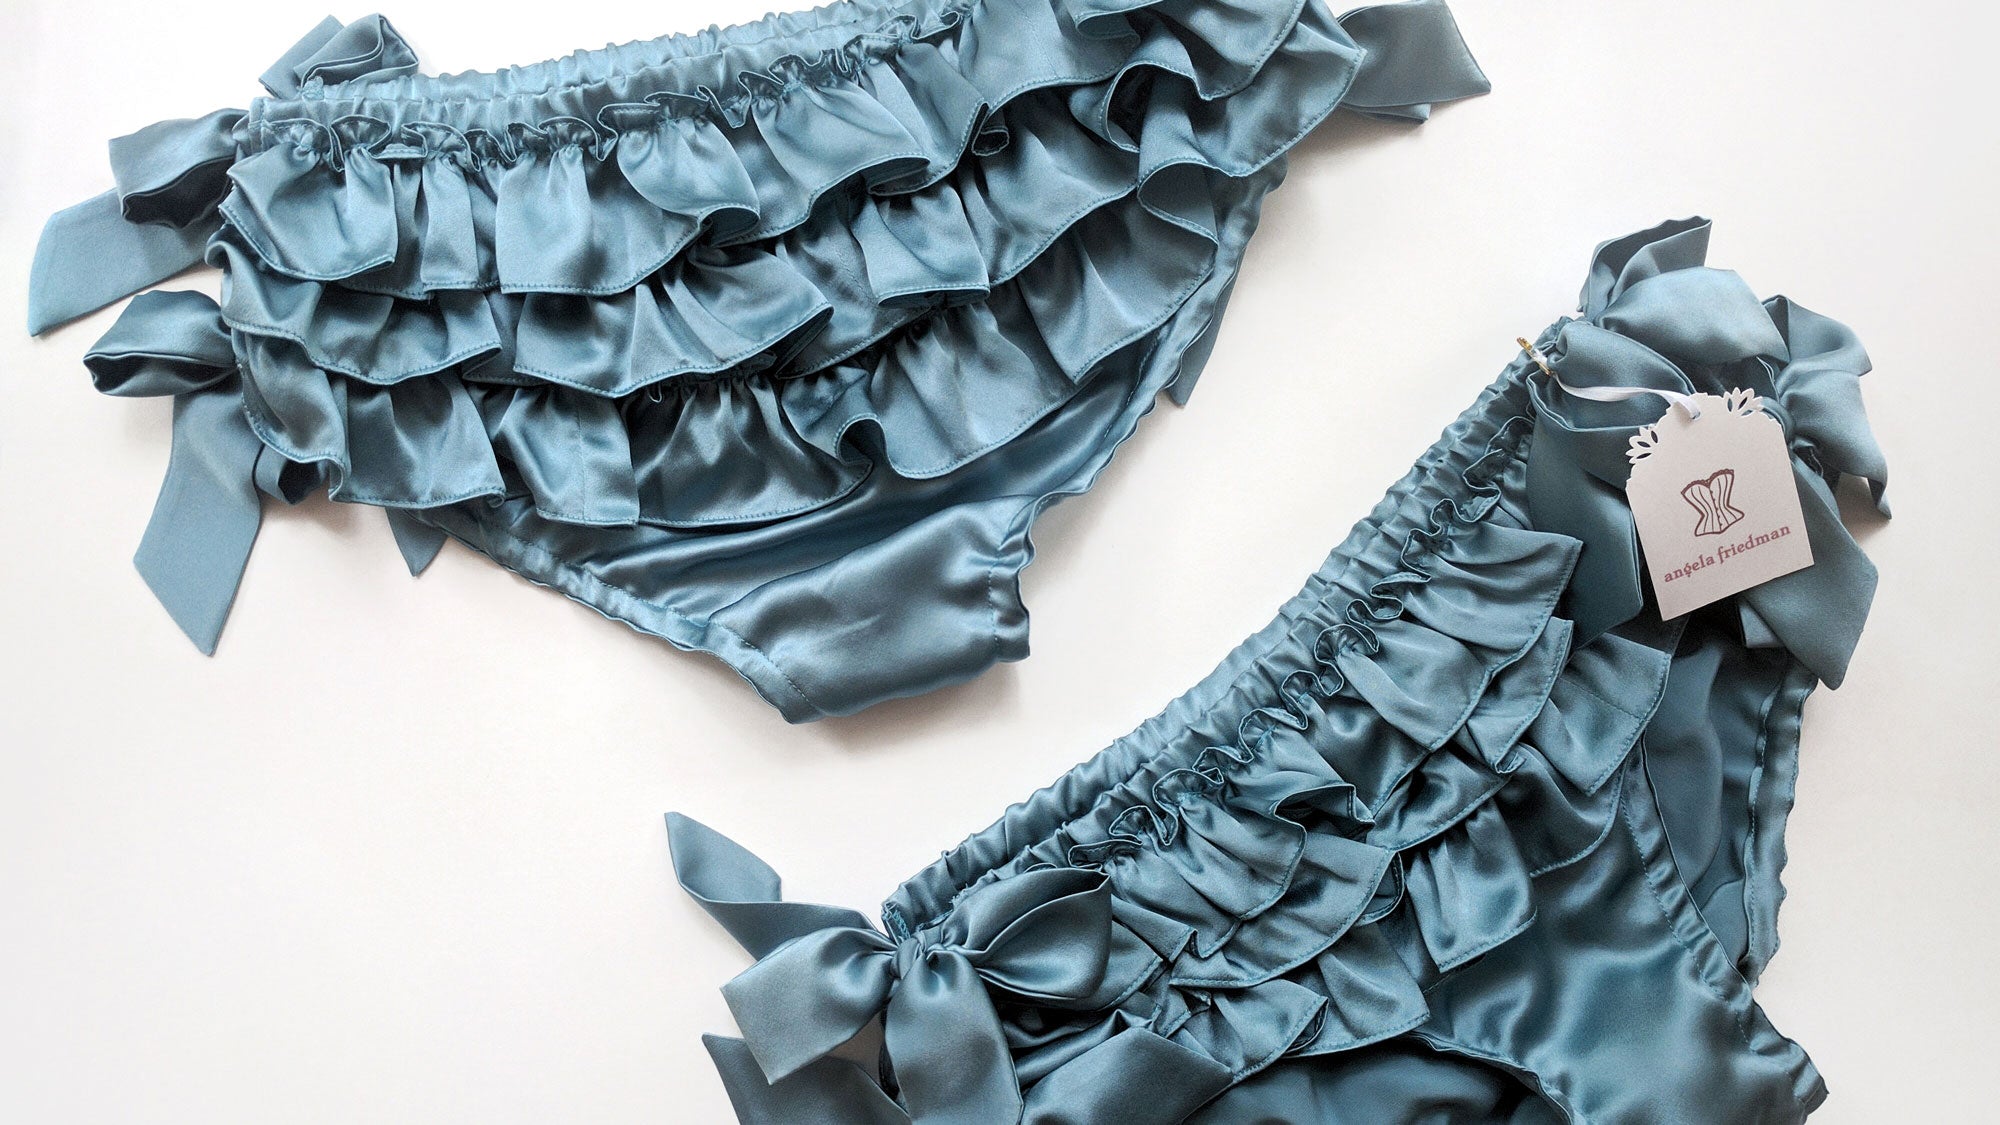 Teal blue ruffled panties in 100% silk satin from Etsy and Angela Friedman